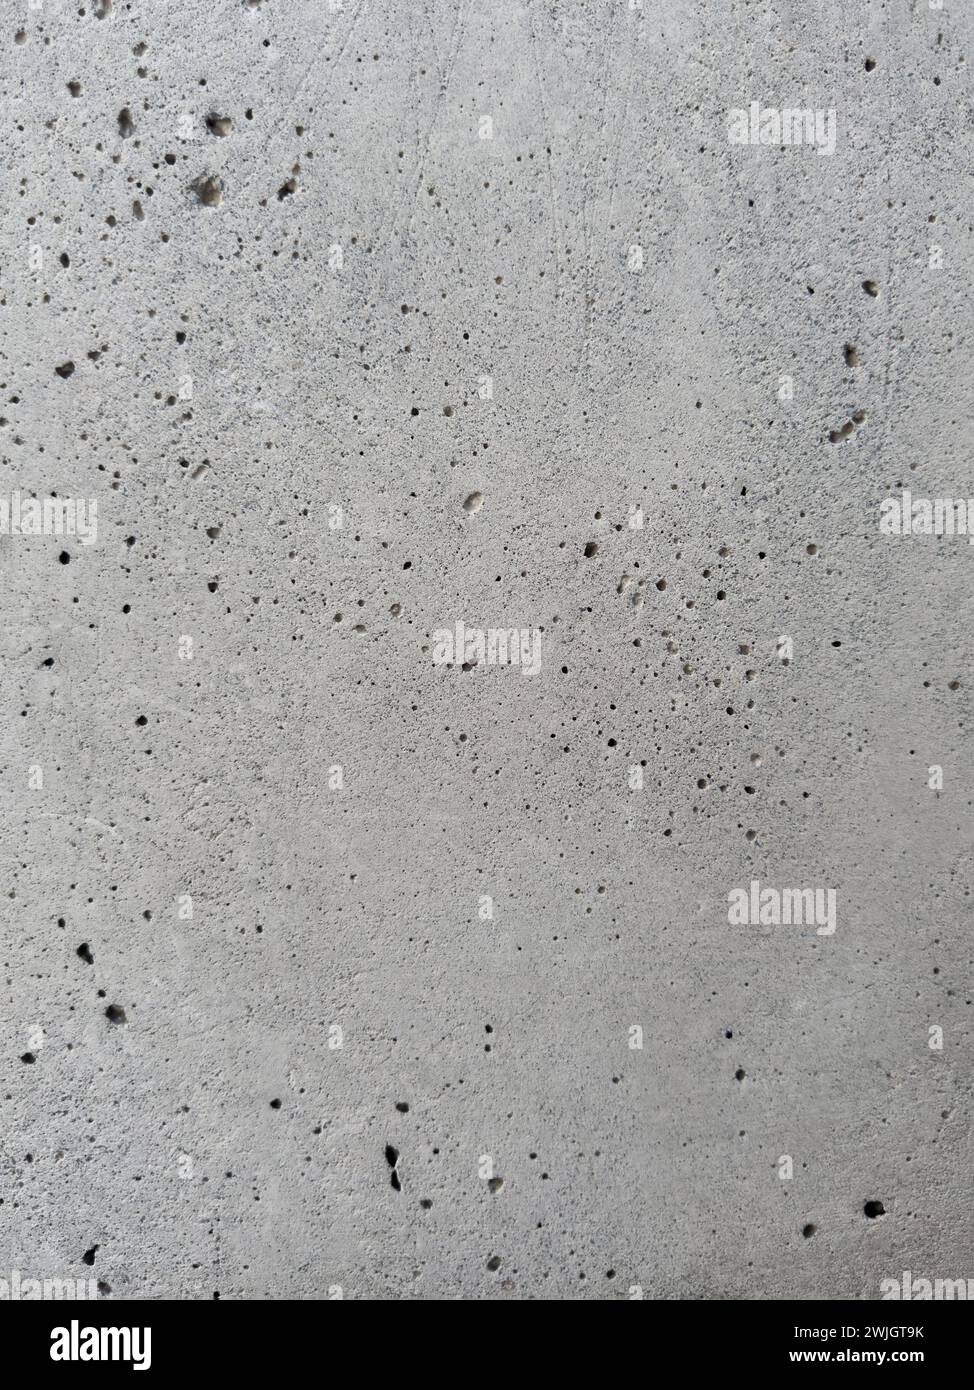 Concrete texture wall with hole pores macro close up background Stock Photo